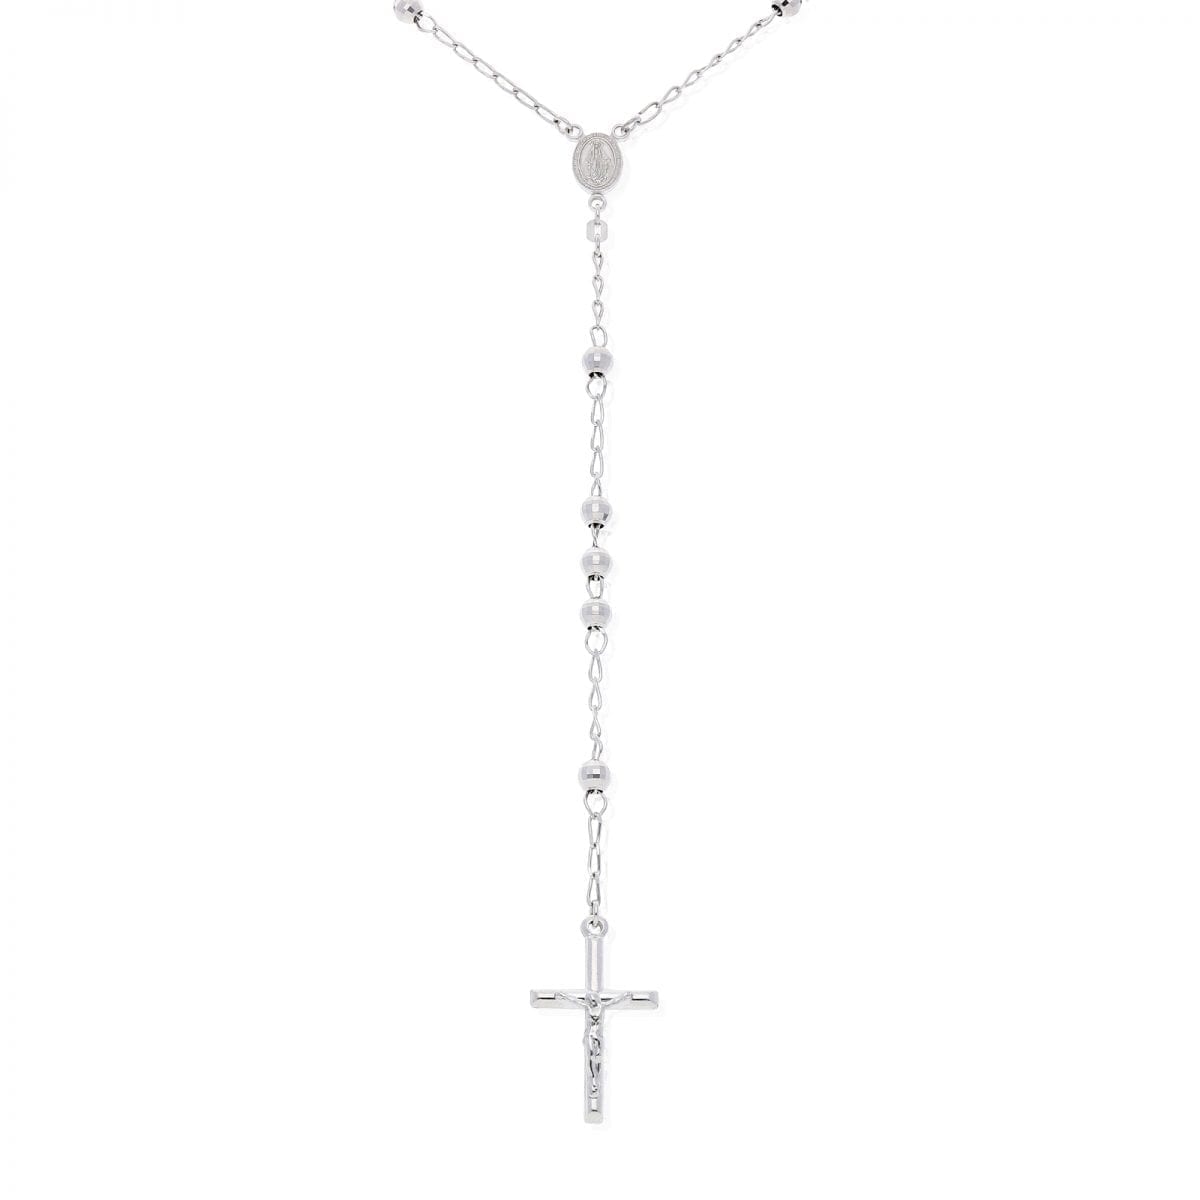 925 Sterling Silver 5mm Diamond-Cut Rosary Cross Chain Necklace 26"